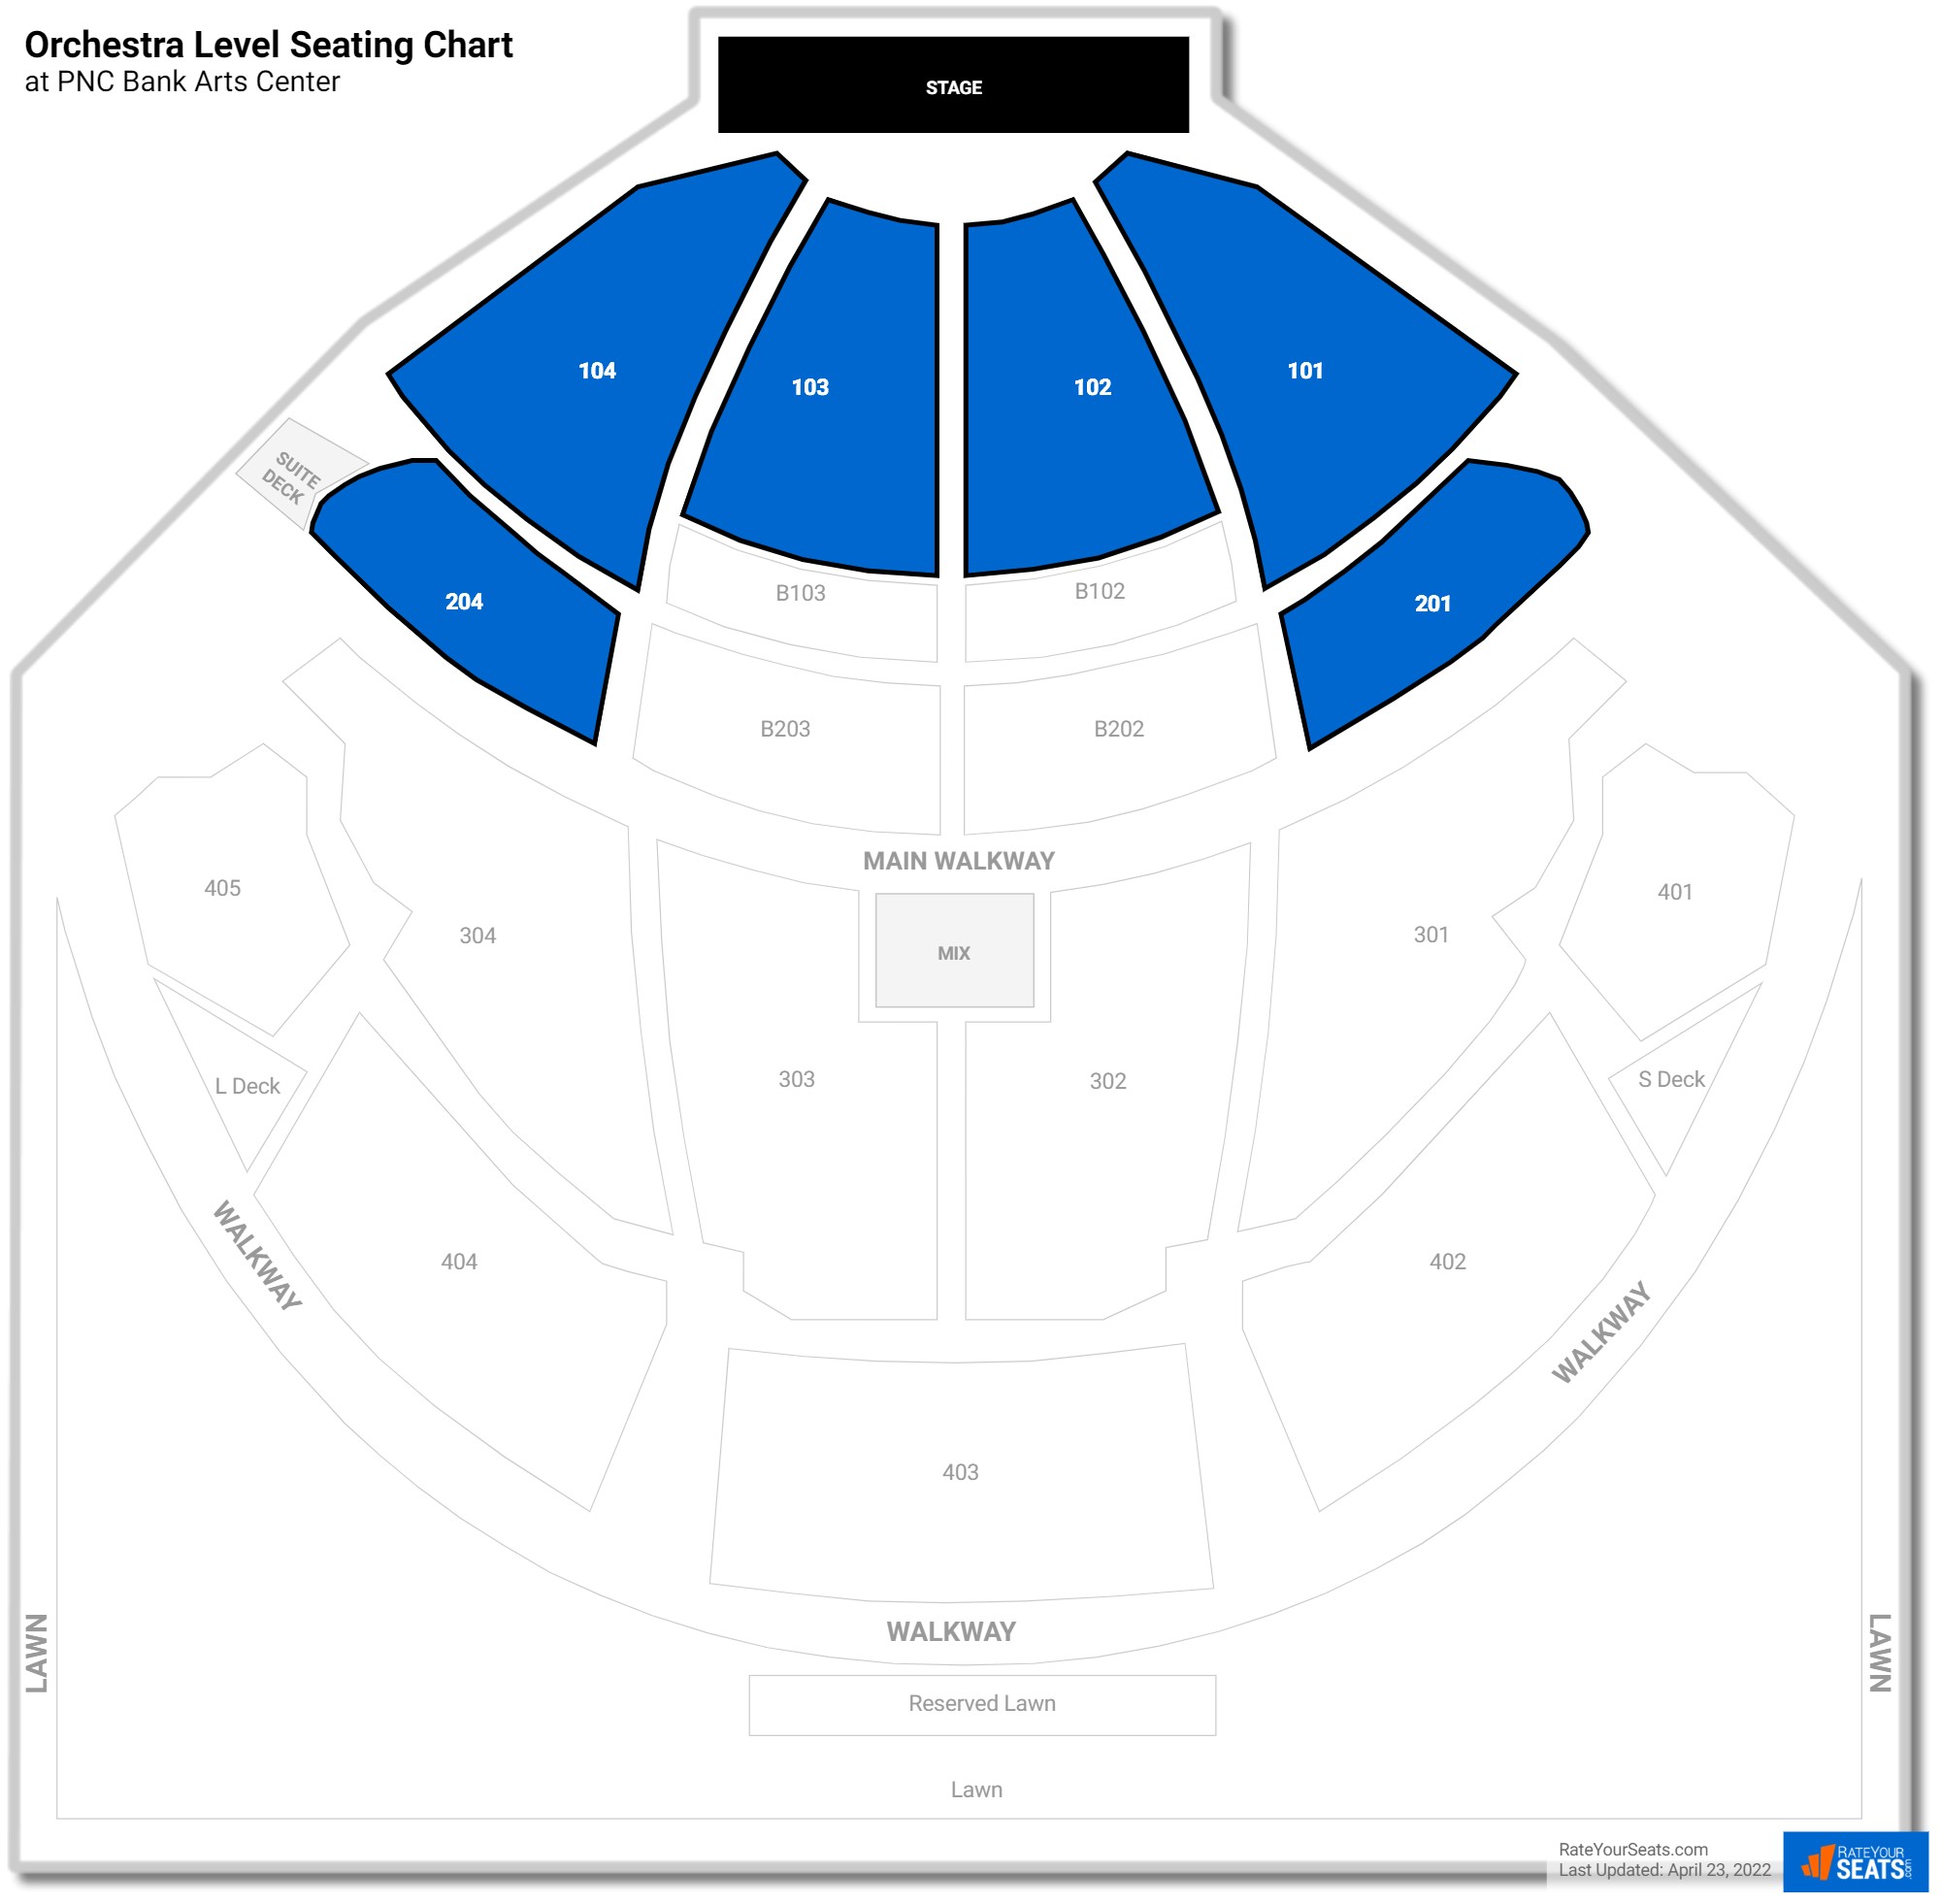 Concert Orchestra Level Seating Chart at PNC Bank Arts Center